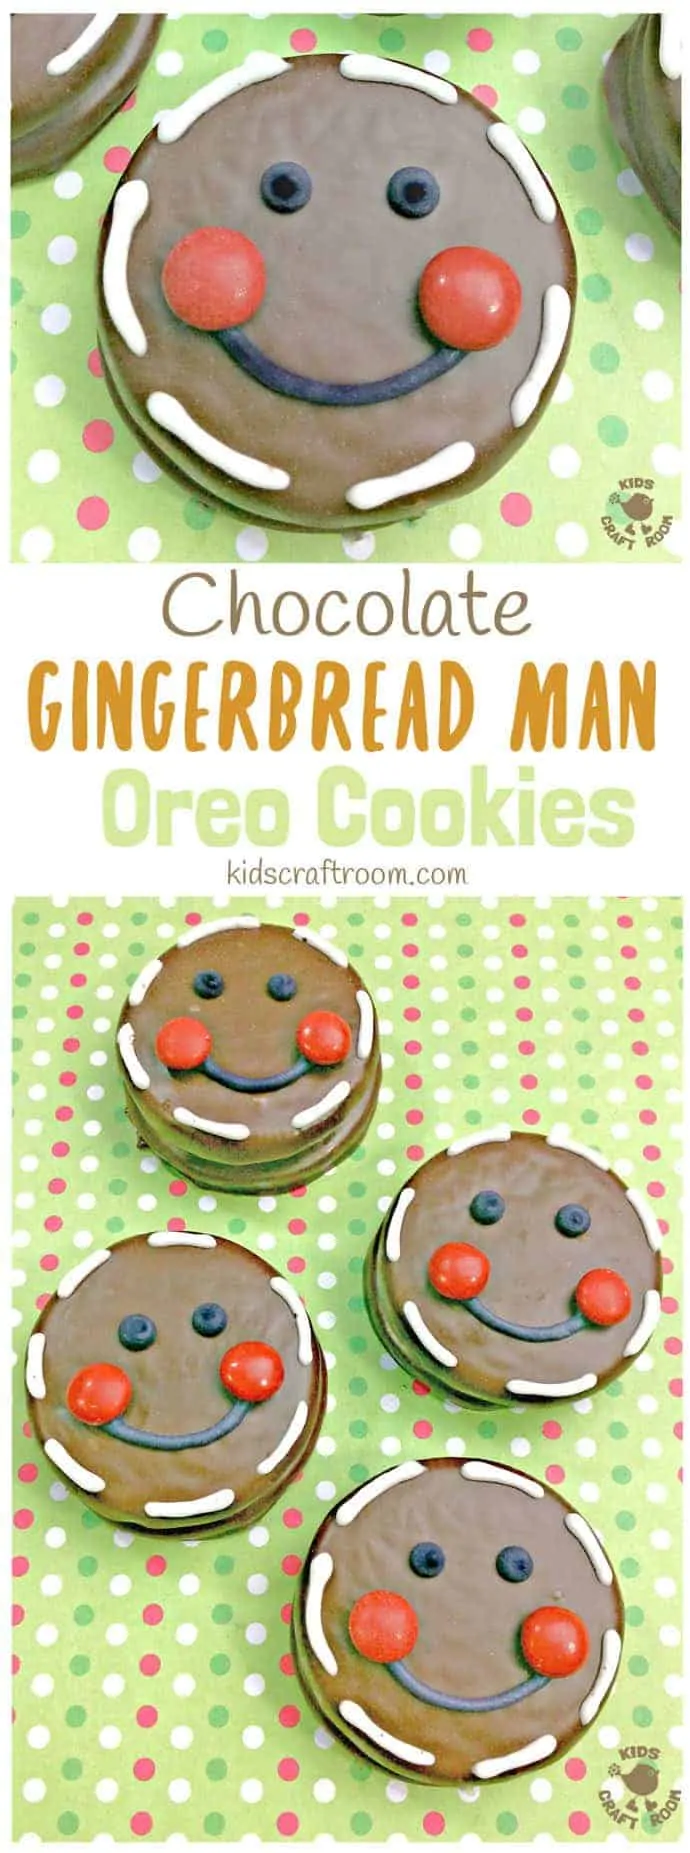 CHOCOLATE GINGERBREAD MAN OREO COOKIES - Fun Christmas treats for cooking with kids. This is an easy Christmas recipe with an Oreo base the whole family will enjoy. #christmas #christmasrecipes #cookingwithkids #kidsrecipes #oreo #gingerbreadman #gingerbread #christmastreats #christmascookies #cookies #kidscraftroom